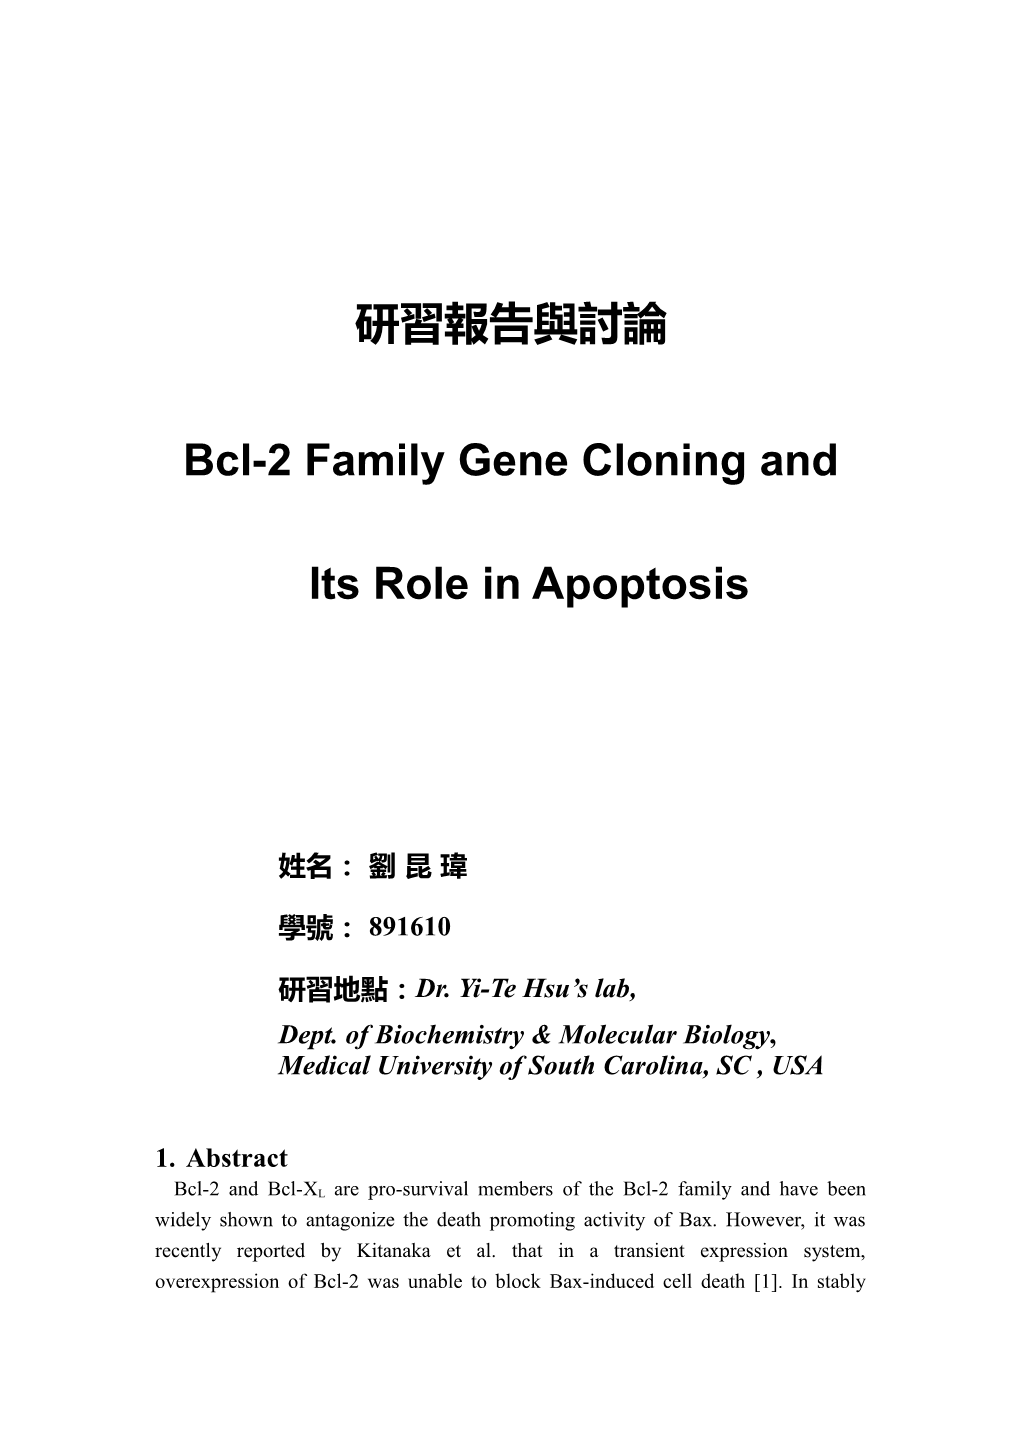 Bcl-2 Family Gene Cloning and Its Role in Apoptosis